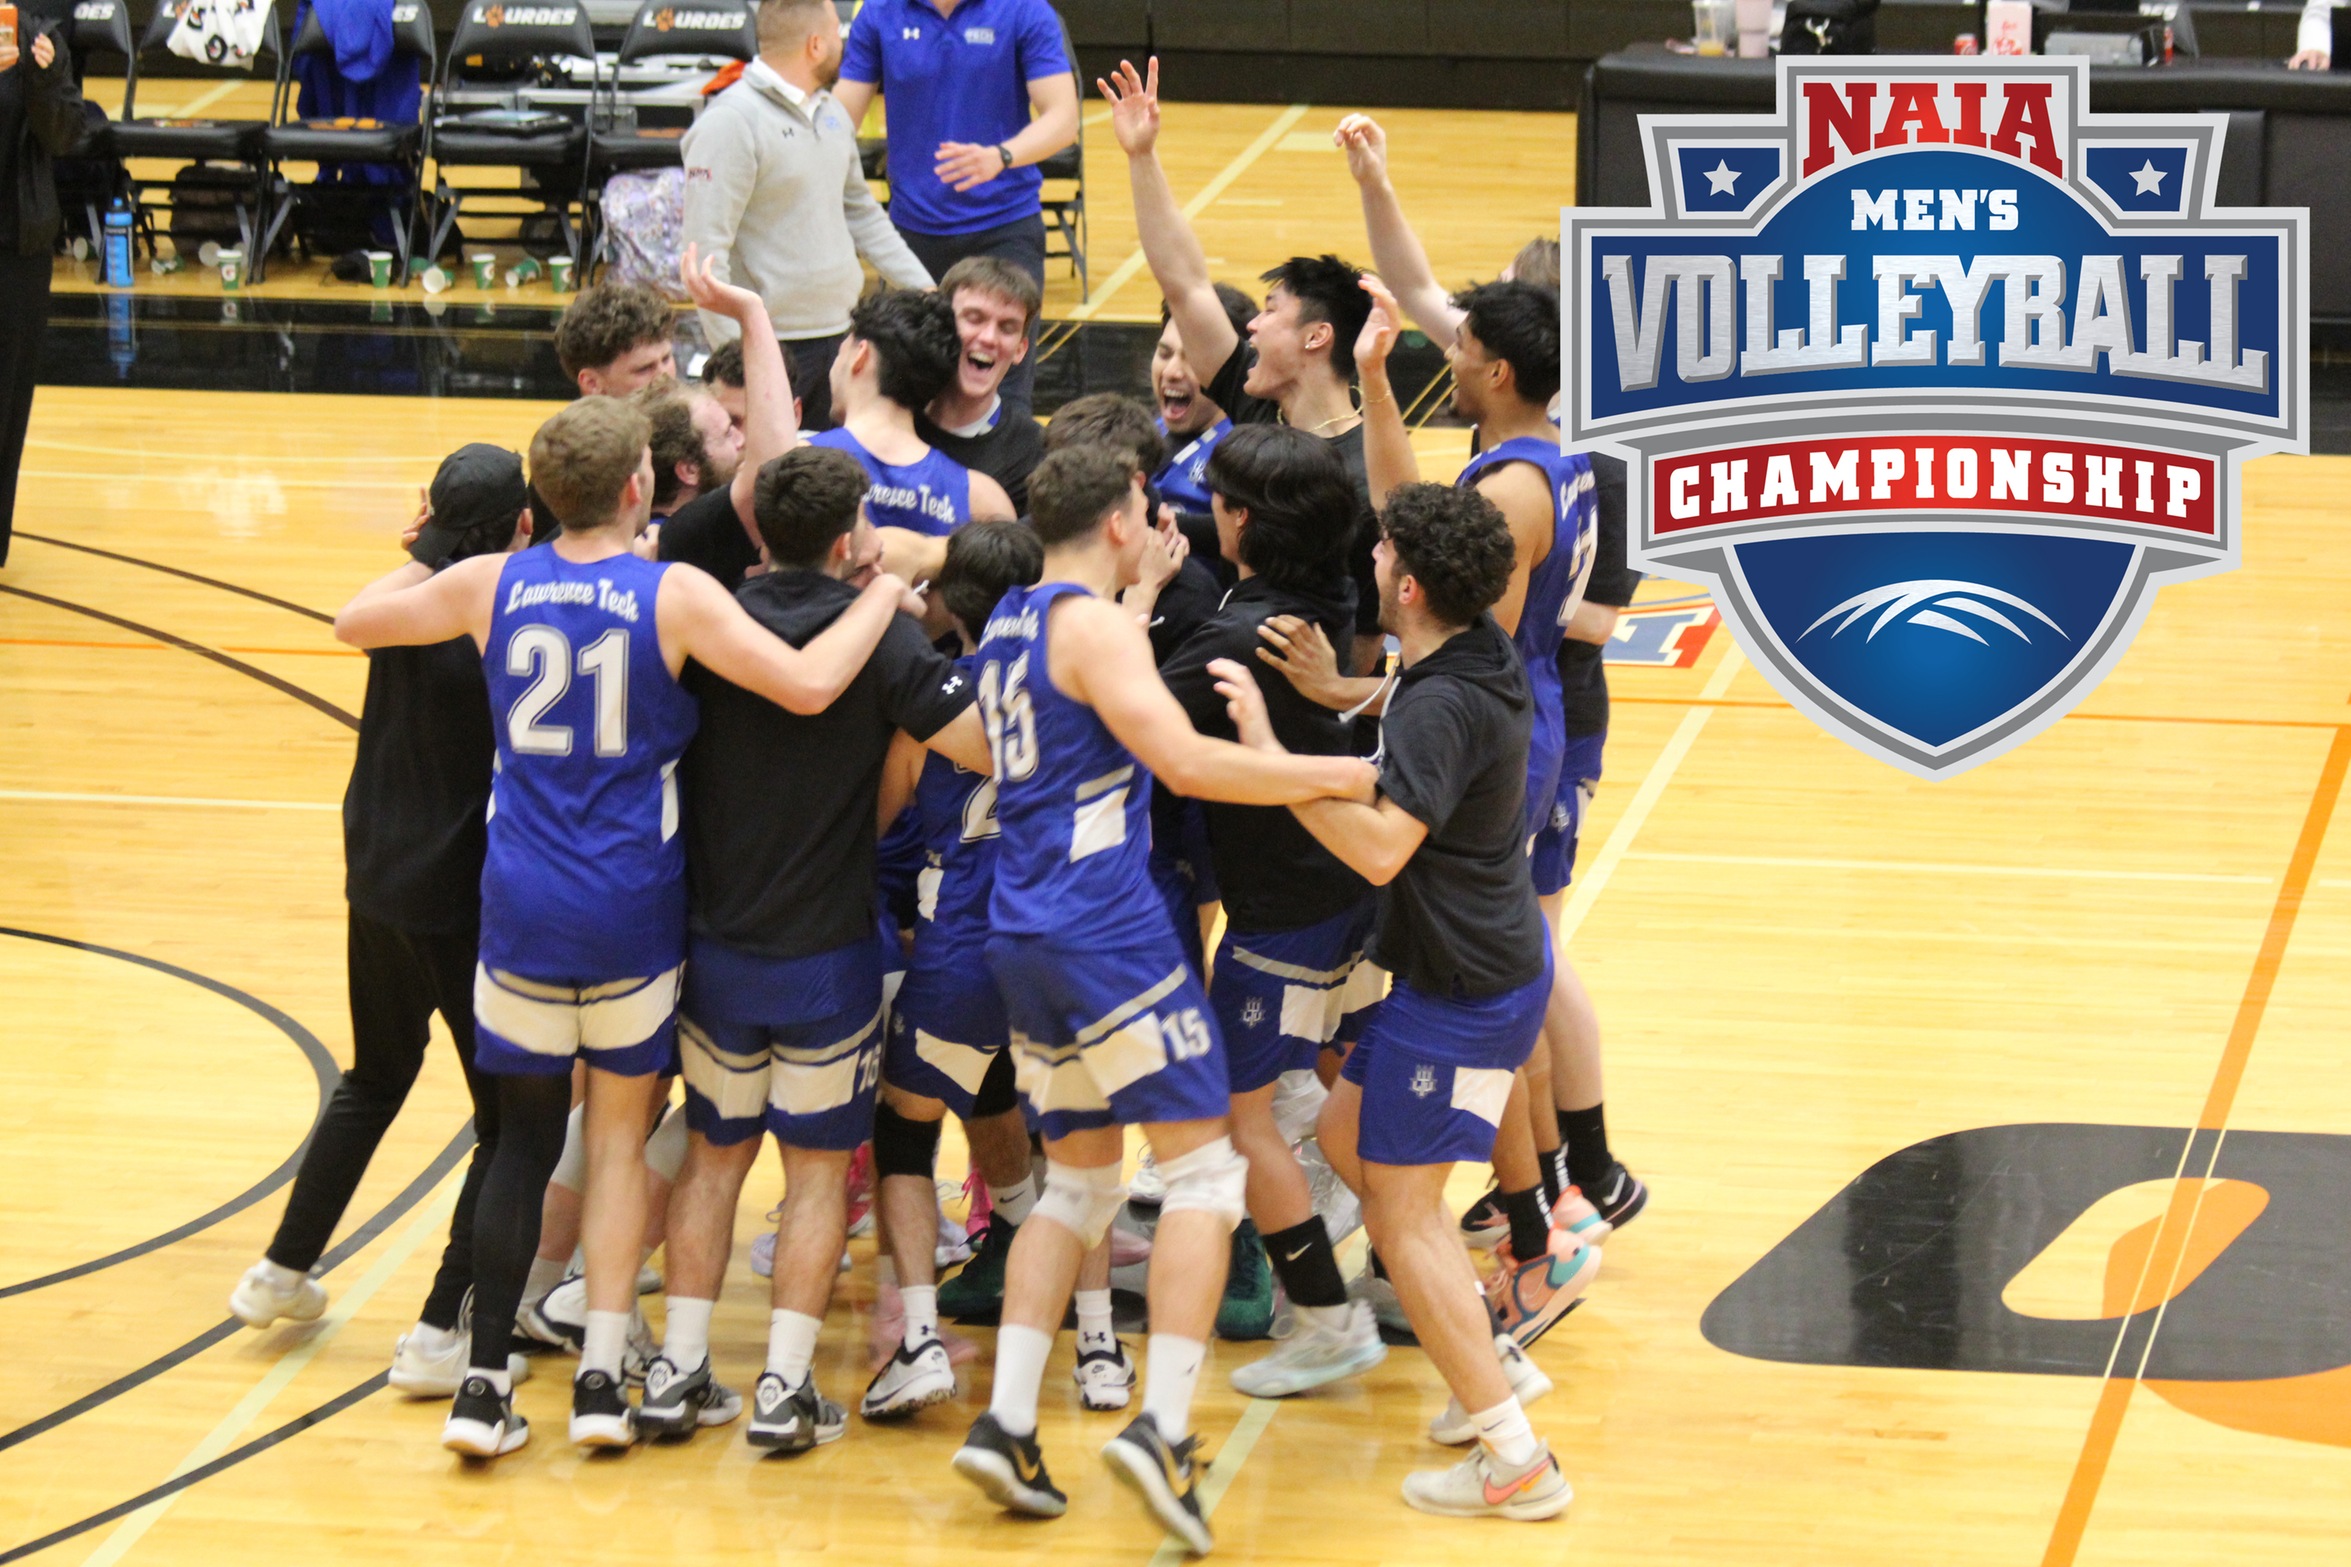 Lawrence Tech to Represent WHAC at NAIA Men's Volleyball Championship